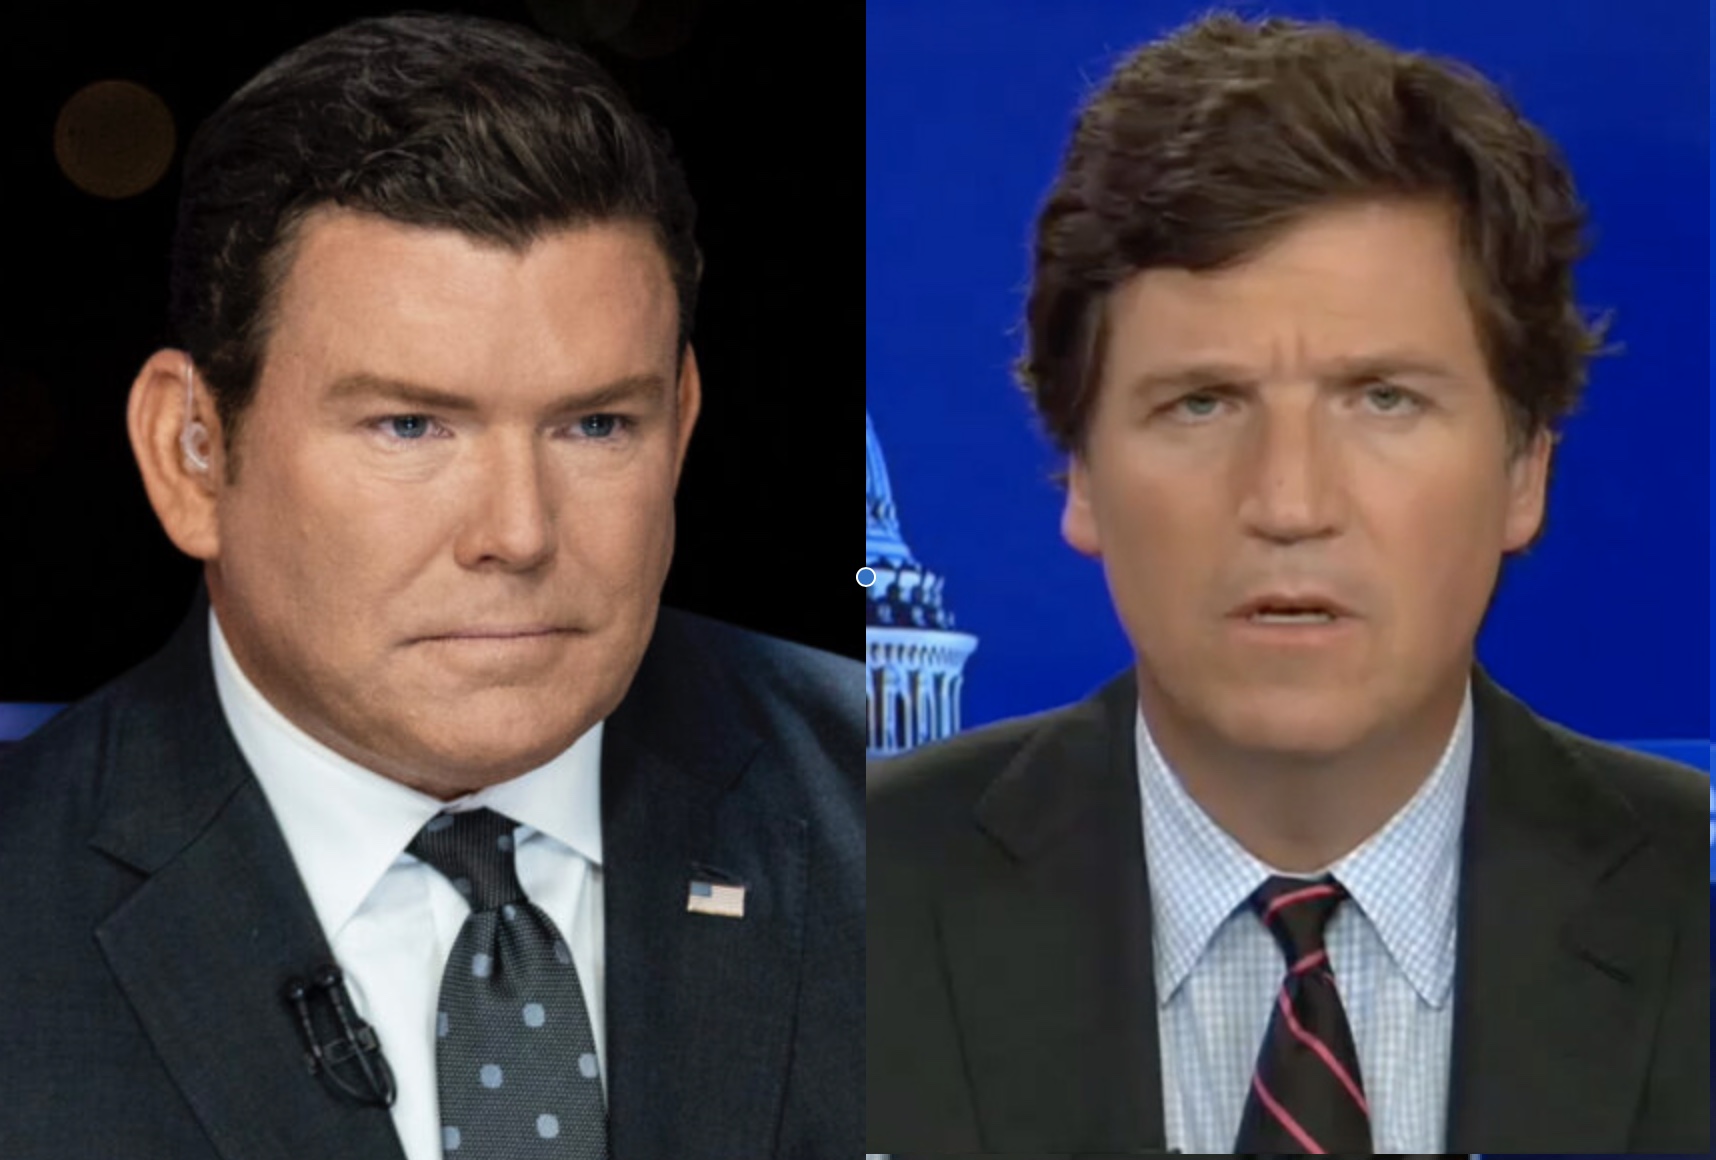 Fox News anchor Bret Baier's reputation takes hit after text